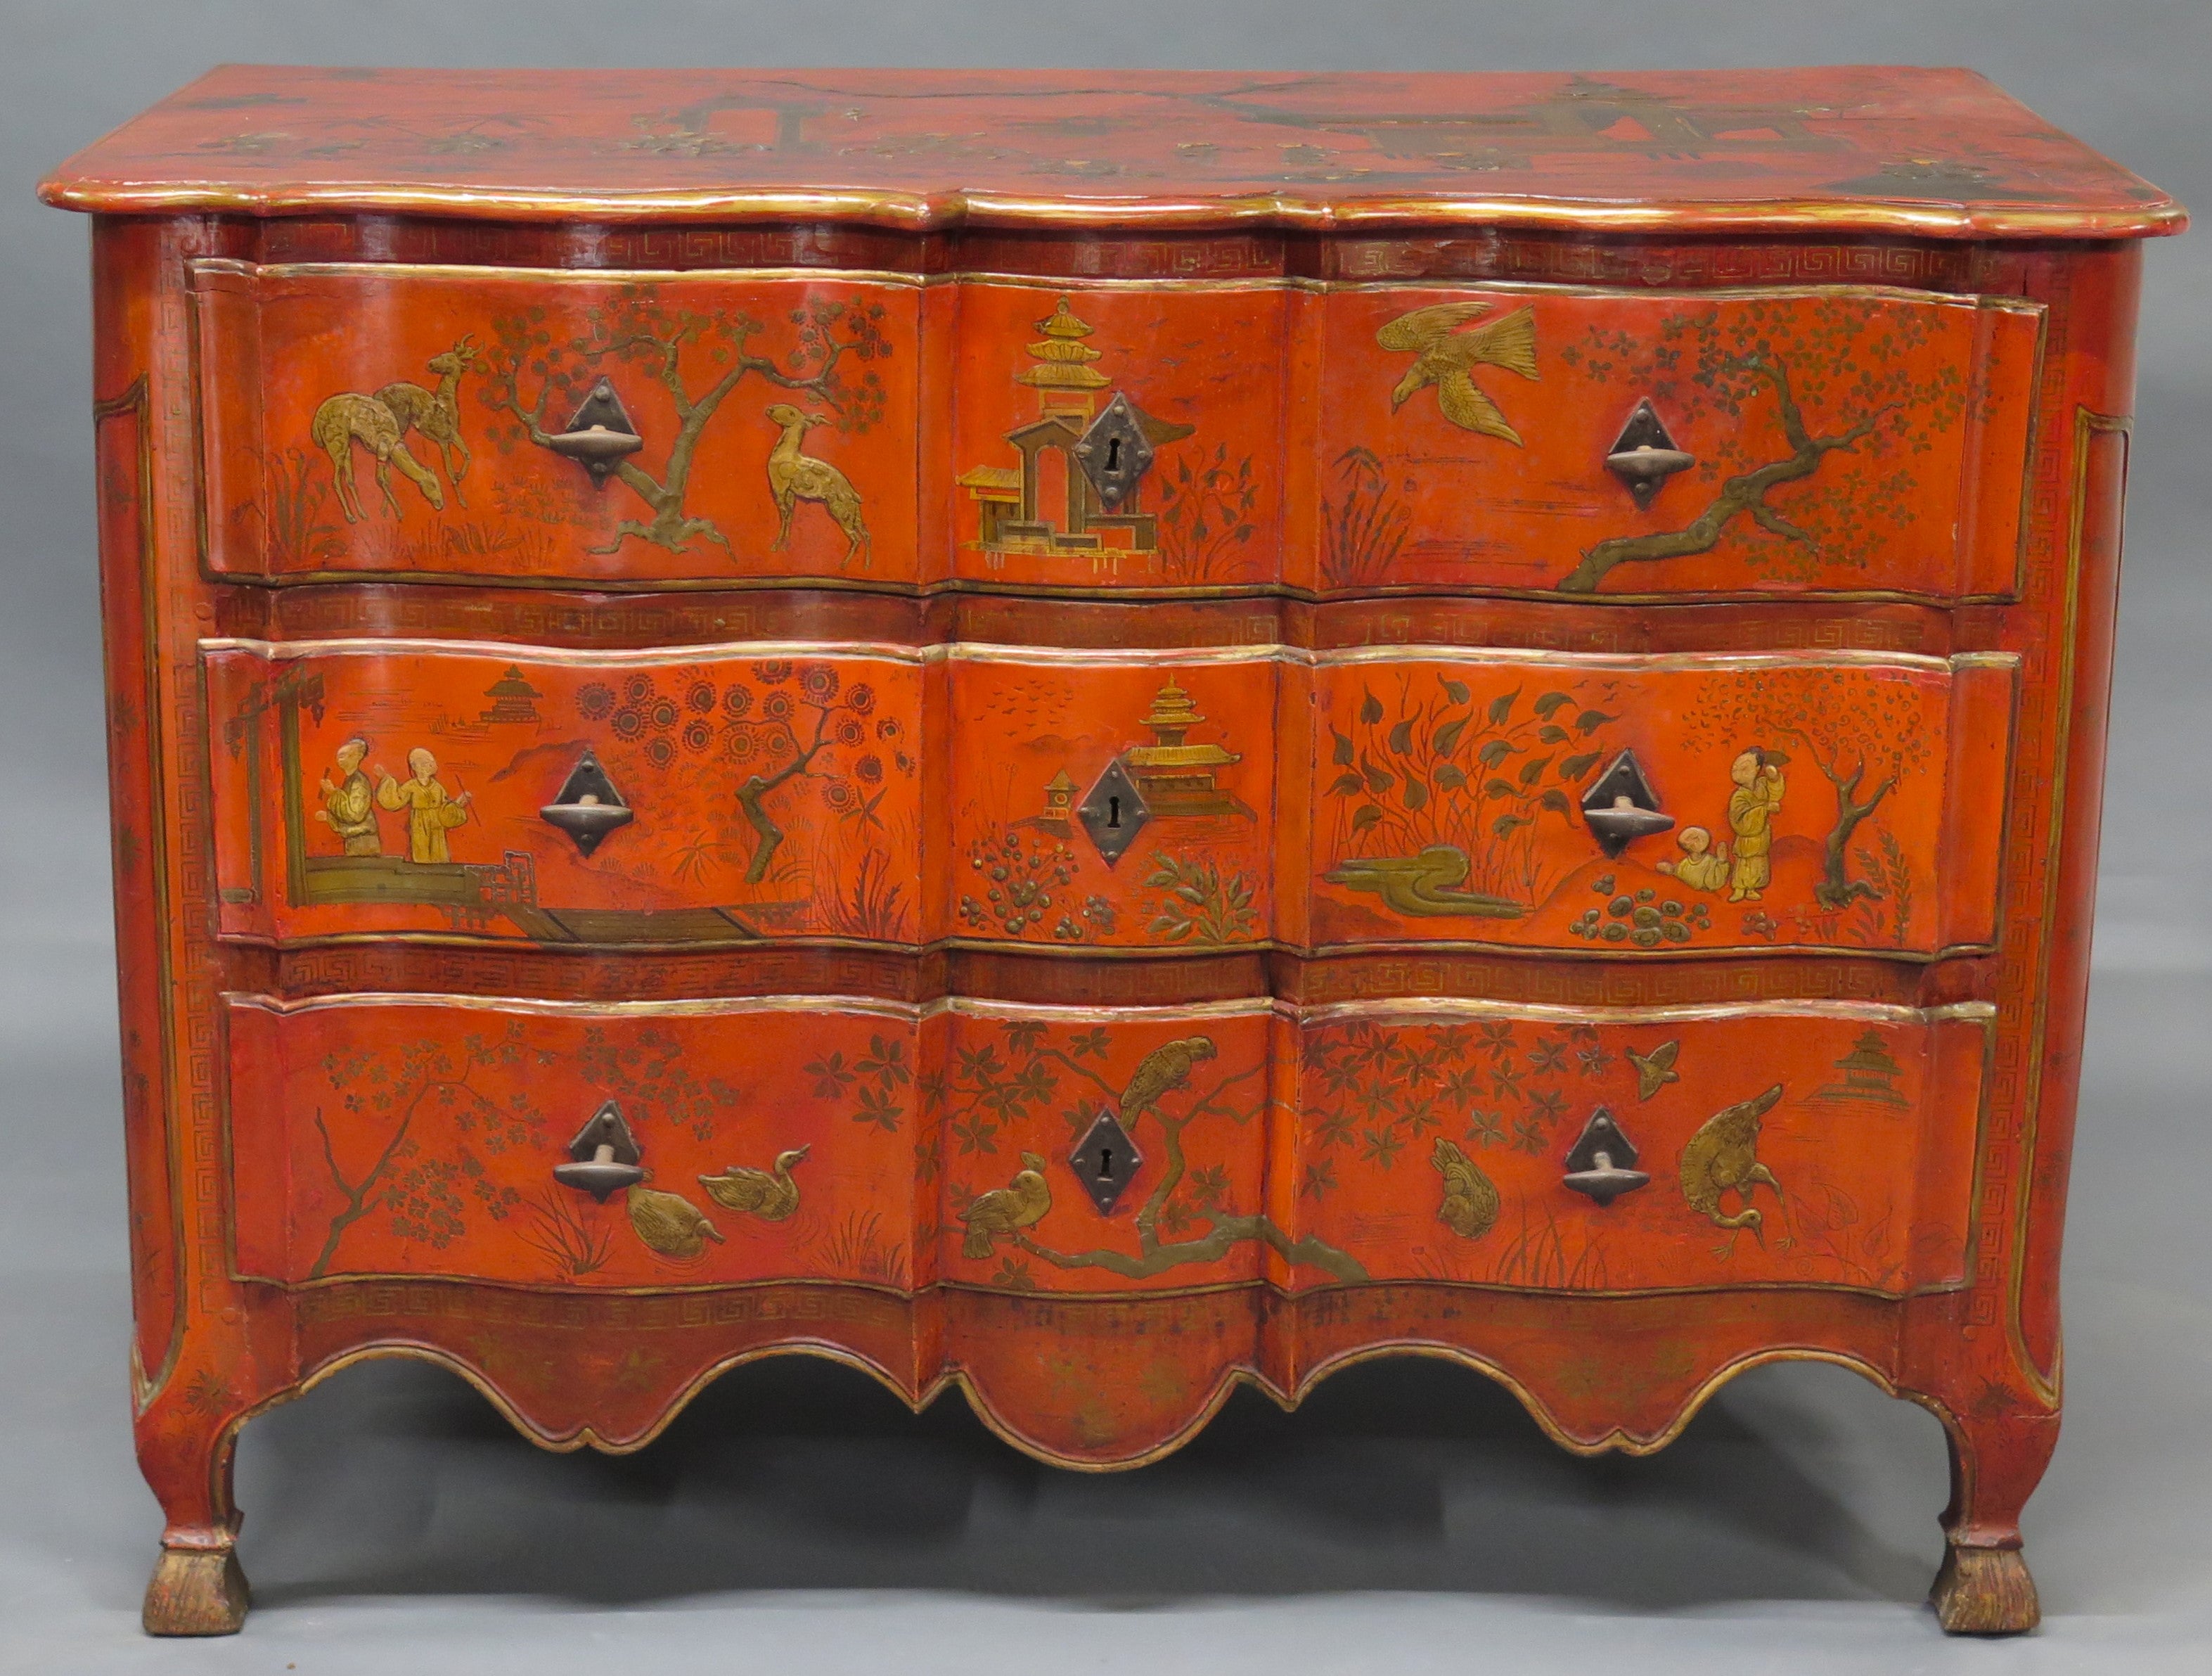 A Continental Red Chinoiserie Decorated Chest